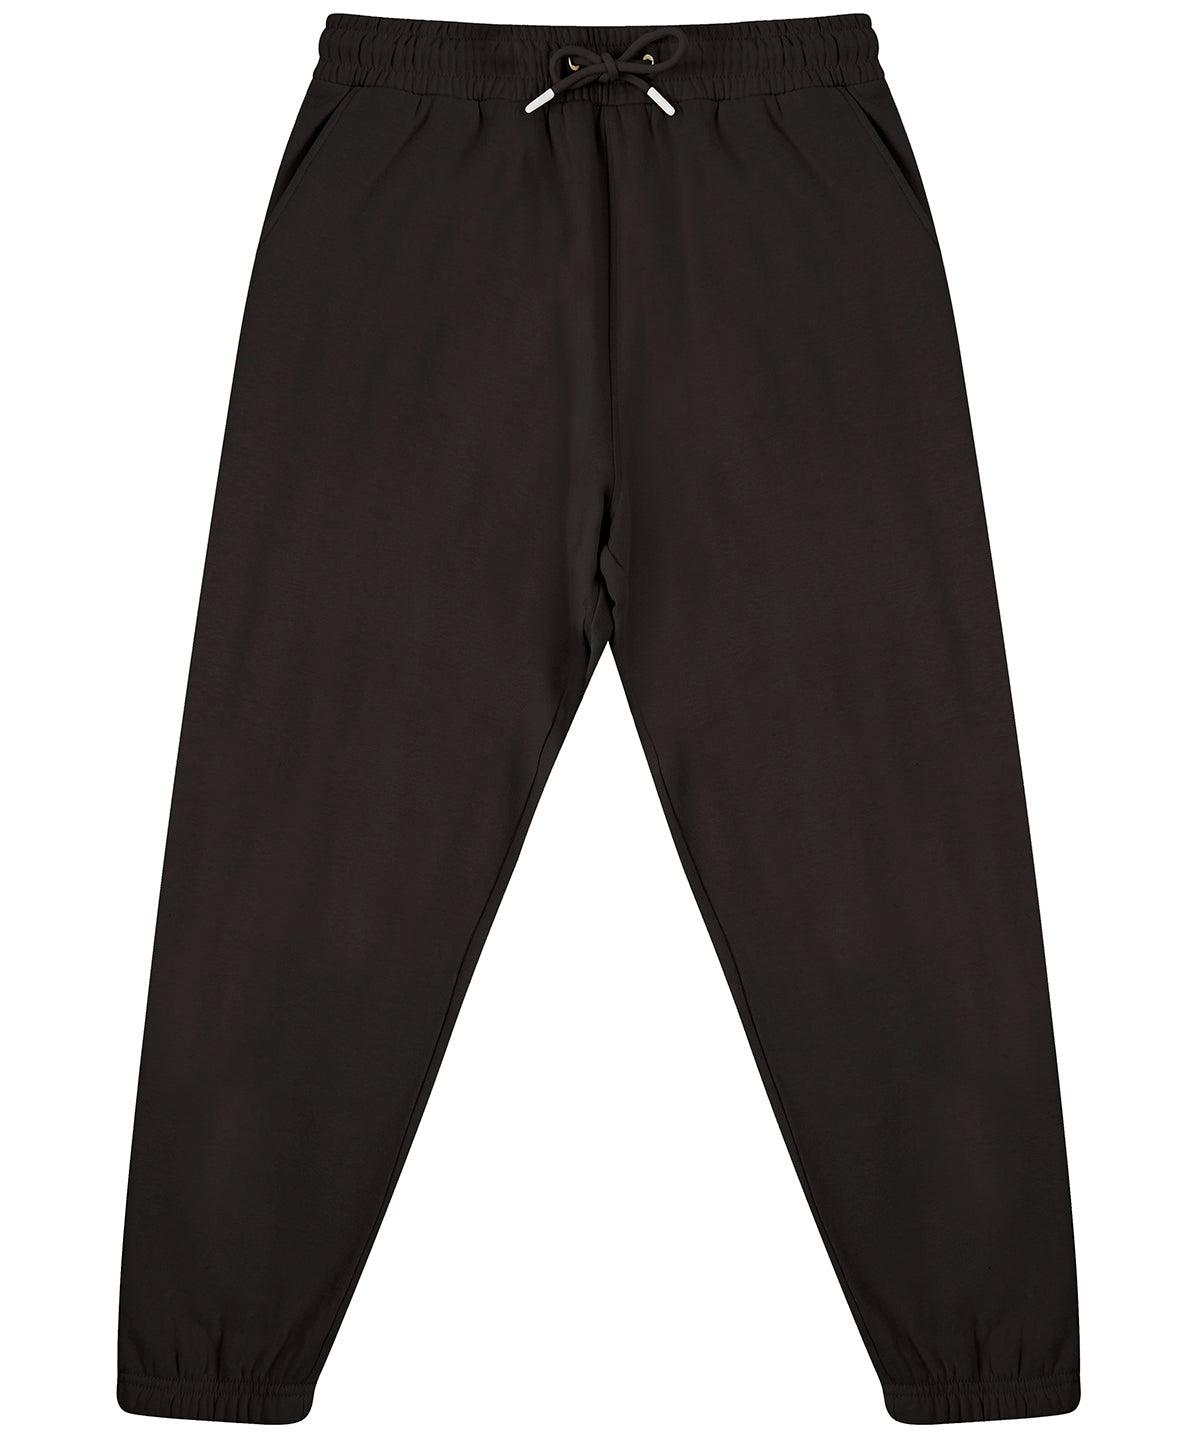 Black - Unisex sustainable fashion cuffed joggers Sweatpants SF Home Comforts, Joggers, New Styles For 2022, Next Gen, Organic & Conscious Schoolwear Centres